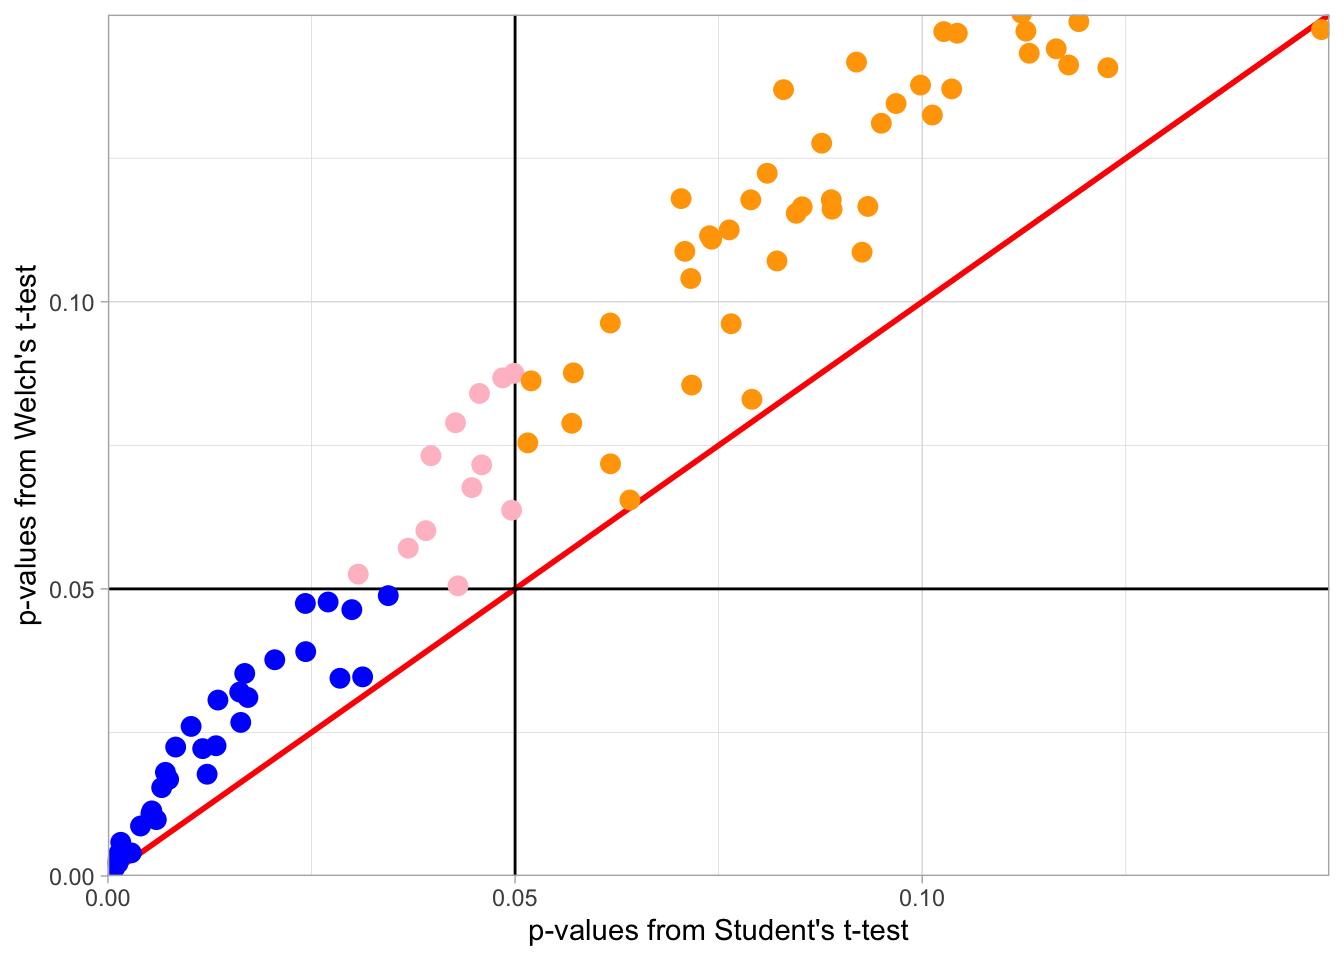 Figure illustrates that with unequal number of participants and/or unequal variance, Welch's t-test and Student's t-test work differently, returning conflciting findings. Findings that are significant in both tests are shown in blue, findings that are non-significant in both tests are shown in orange, and findings that are significant using the Student's t-test but non-significant by using Welch's t-test are shown in pink. The horizontal and vertical black lines represent the alpha = .05 for both tests. Dots falling on diagonal red line show tests with the same p-value for Welch's and Student's t-tests. Dots above (below) the red line shown tests where p-value is smaller (larger) in the Student's t-test.